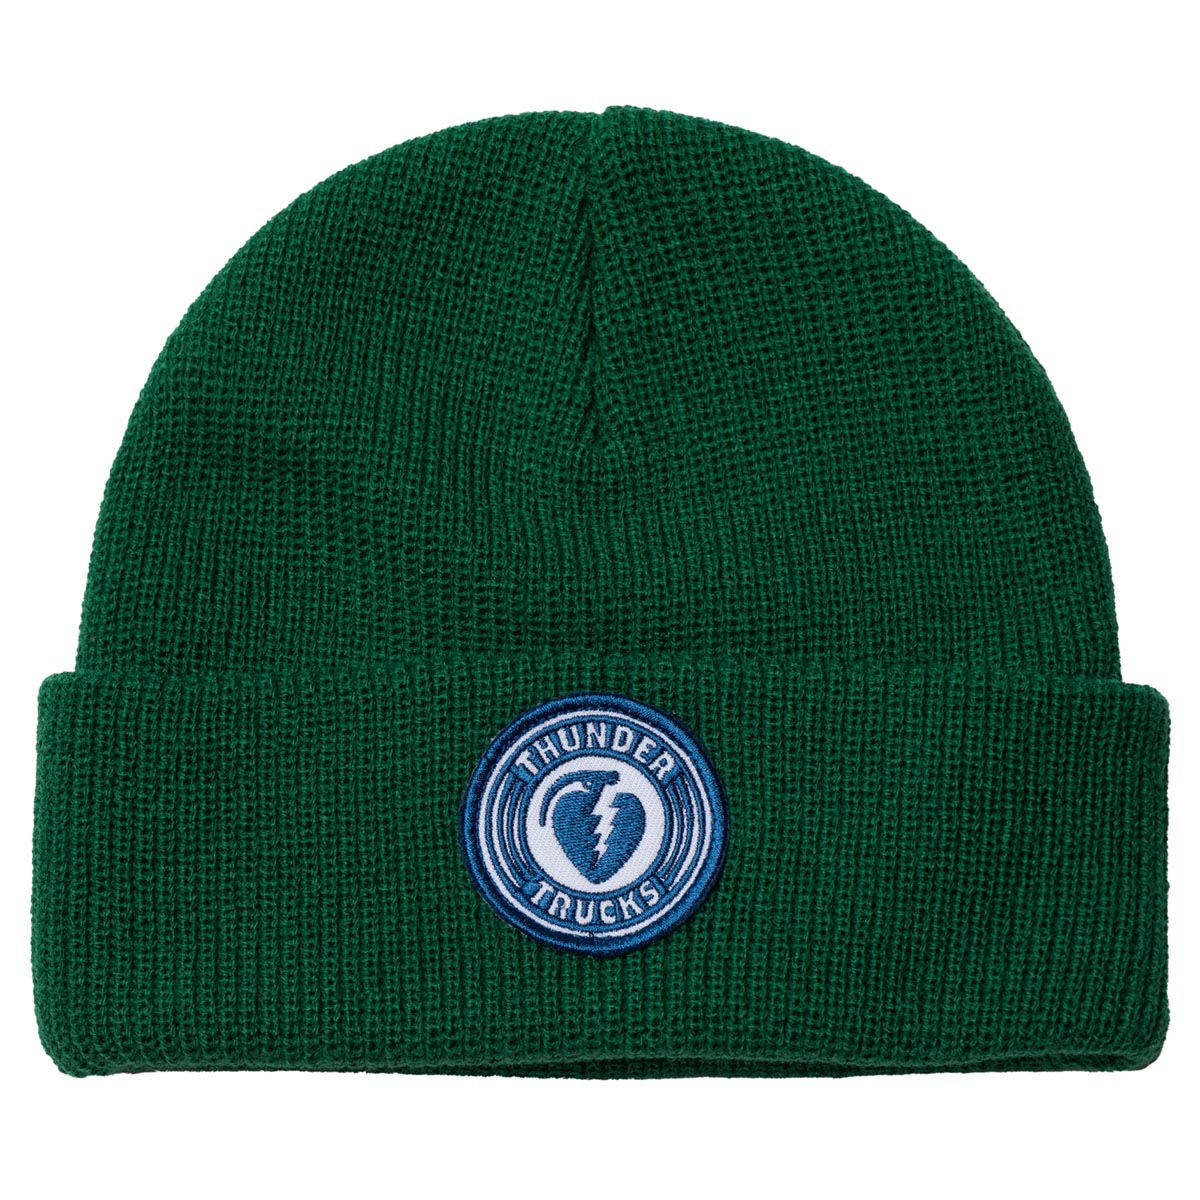 Thunder Charged Grenade Patch Beanie - Dark Green/Blue/White image 1